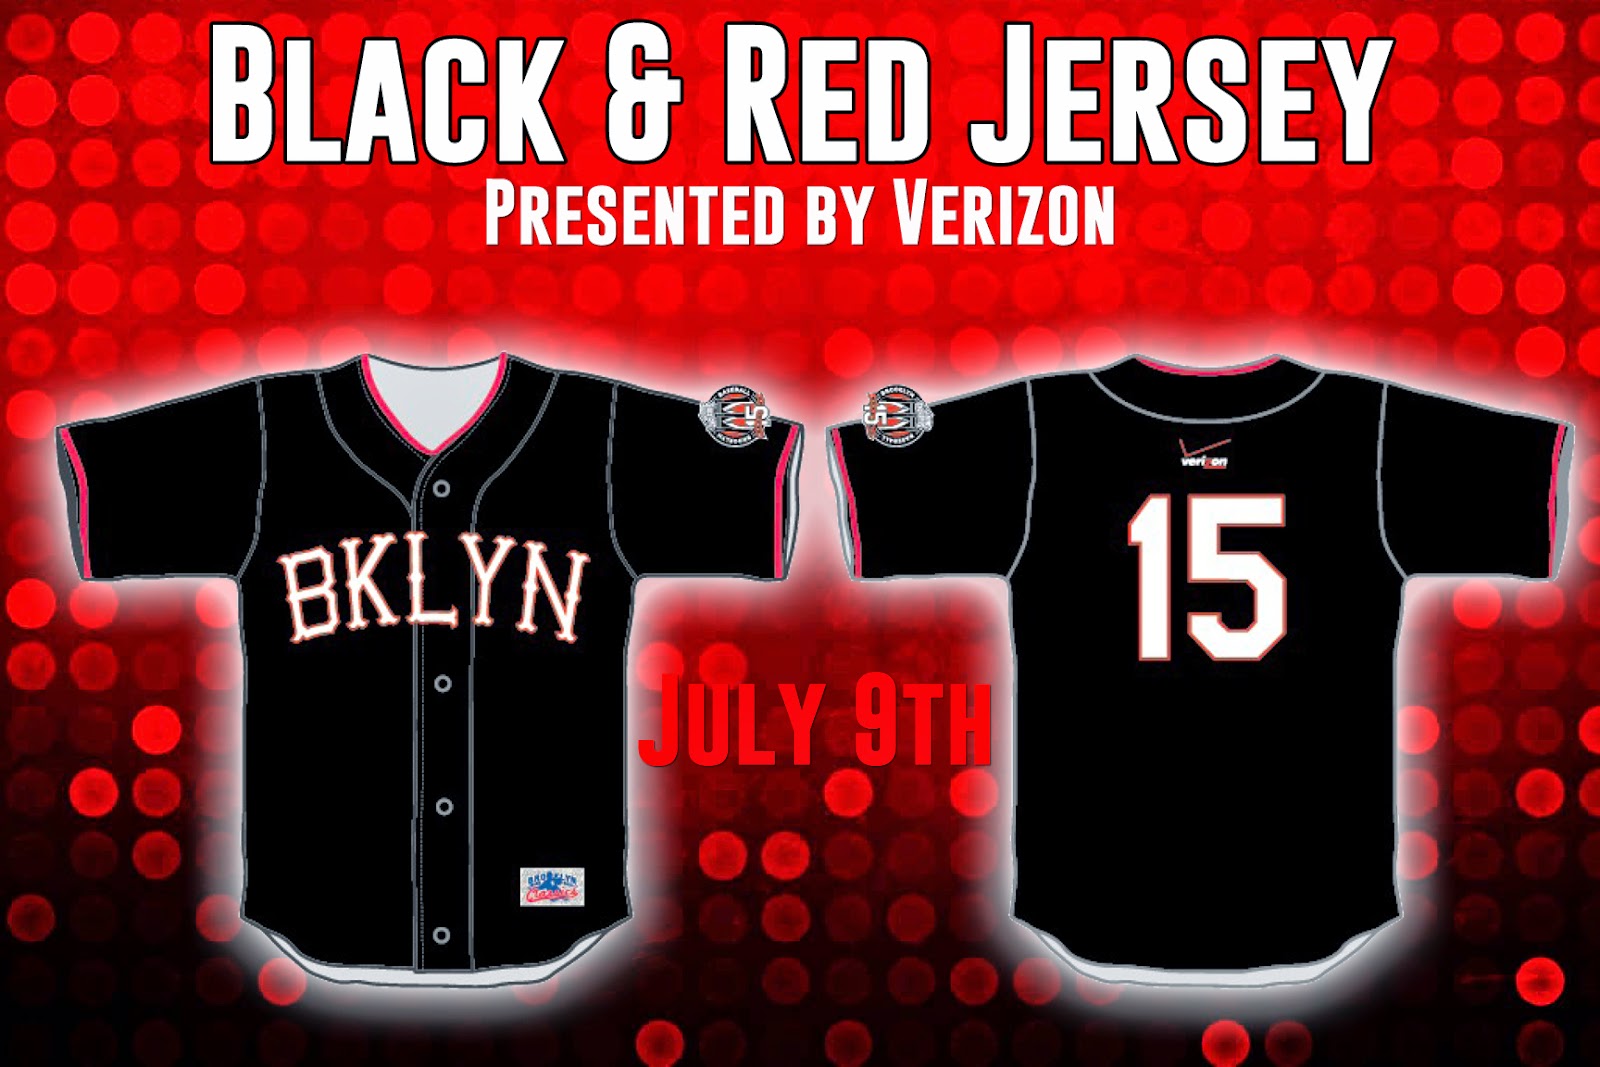 Mack's Mets: Brooklyn Cyclones (SSA) Release 2015 Jersday Thursday